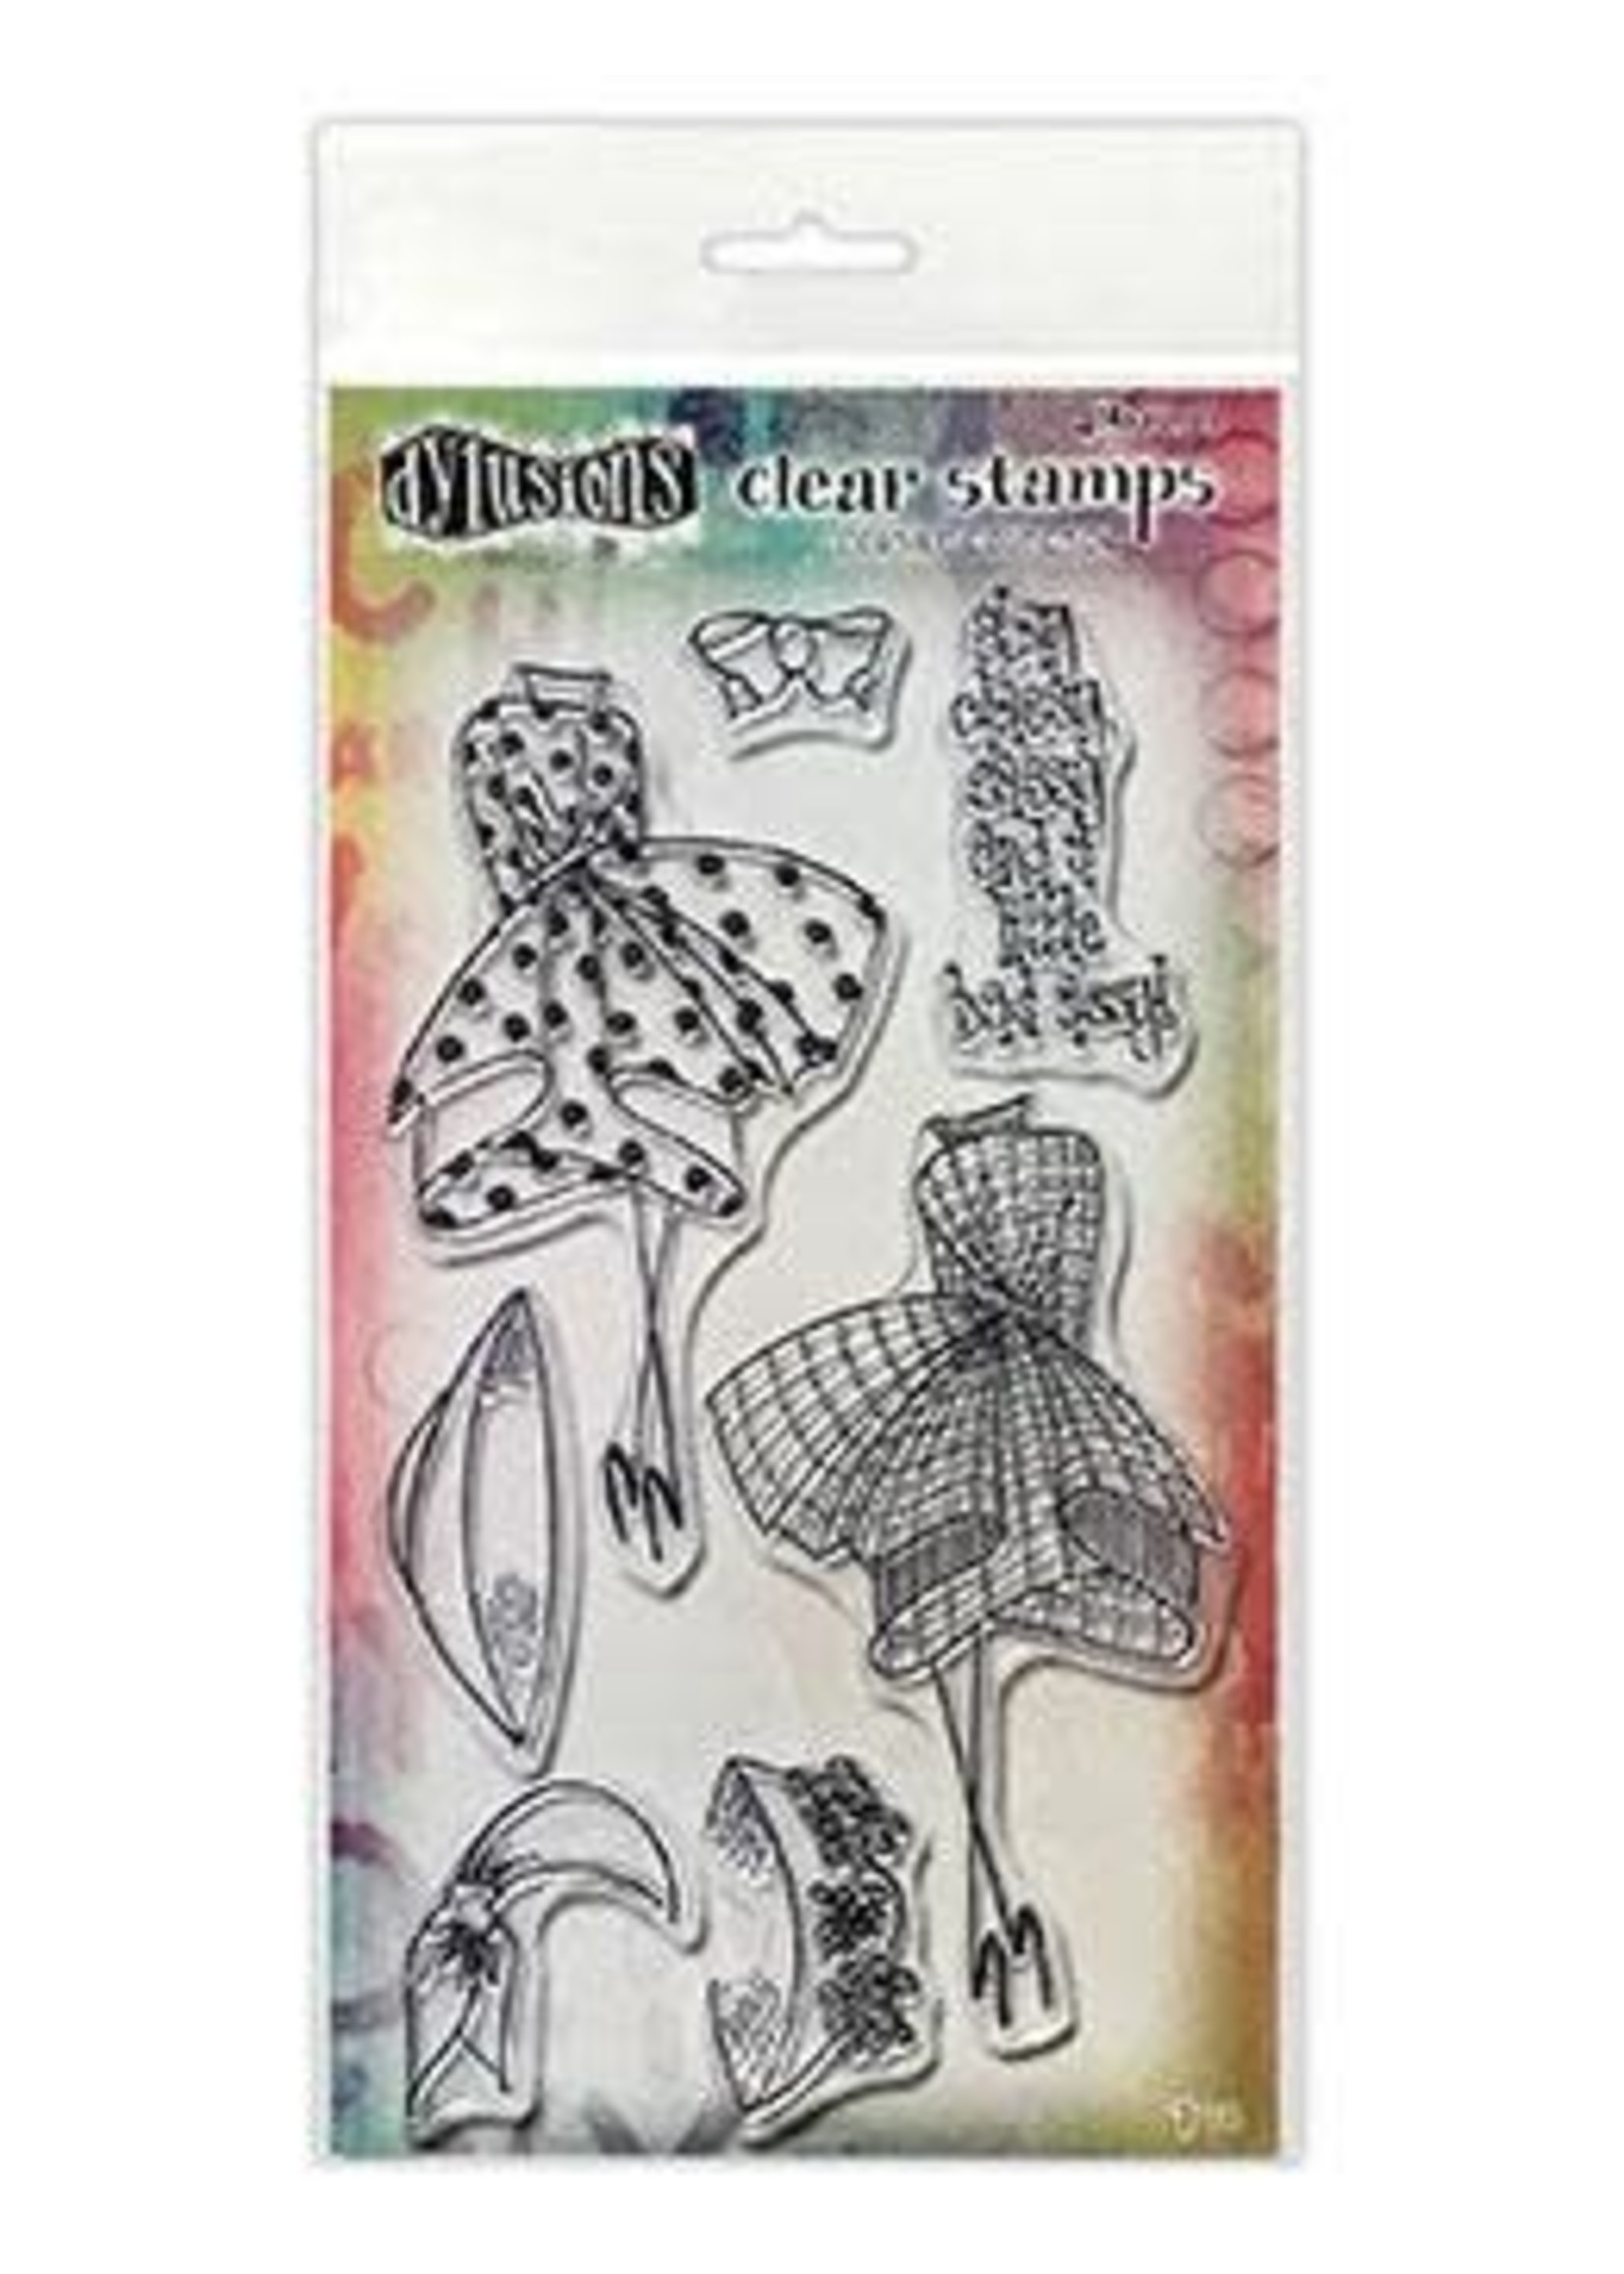 RANGER Dylusions:  Walk in the Park Duo Stamps